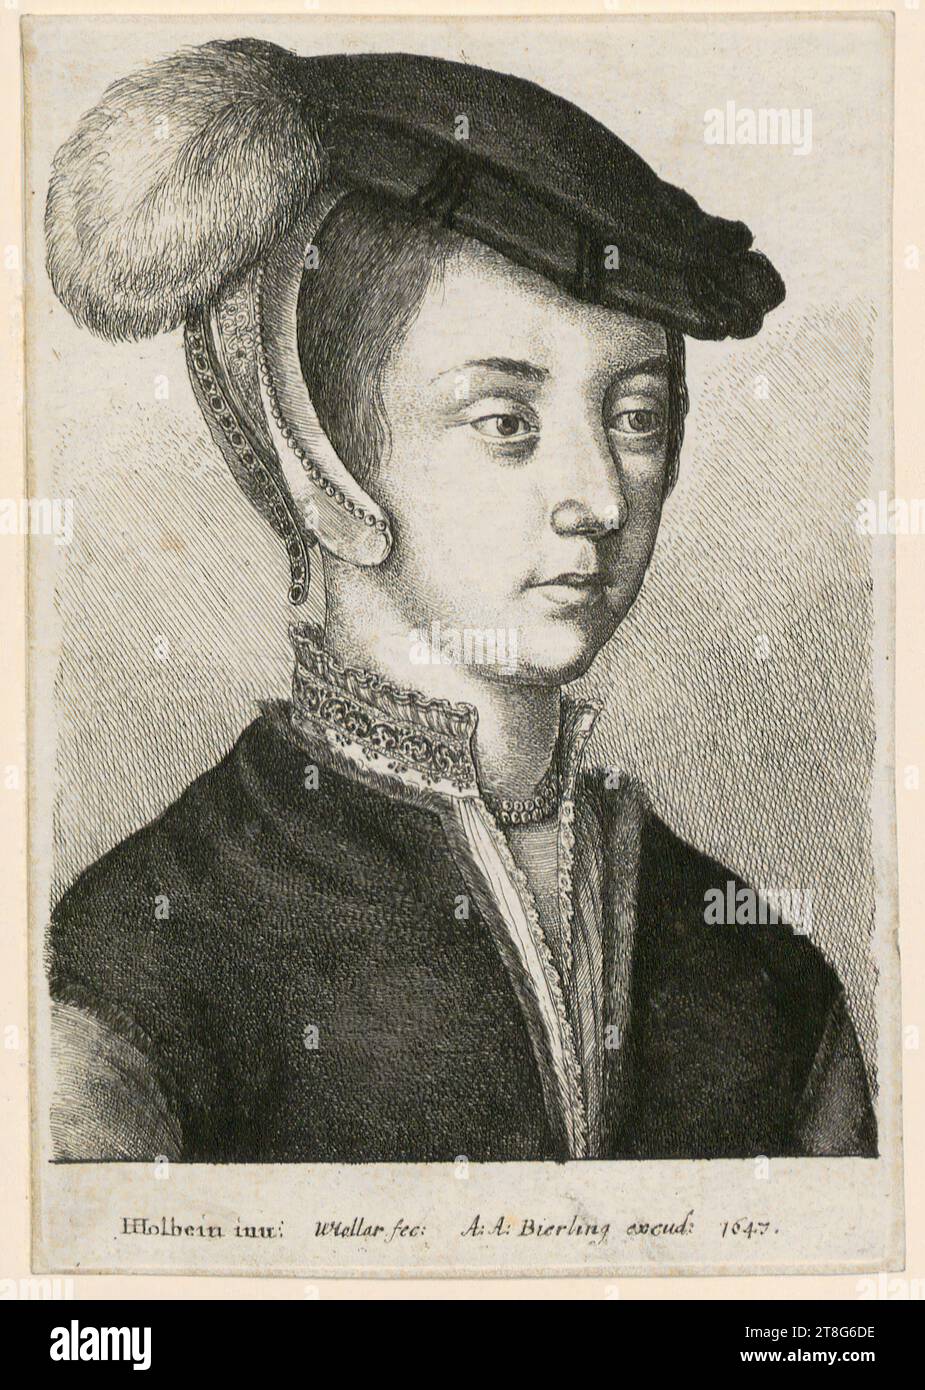 Wenzel Hollar (1607 - 1677)Hans Holbein (the Younger) (1497 - 1543), after Adam Alexius Bierling (mentioned in 1646), editor, bust portrait of a young woman with feathered hat, three-quarter view to the right, origin of the print: 1647, etching and drypoint, sheet size: 13.4 x 9.3 cm, inscribed, signed and dated at the bottom 'HHolbein inu: WHollar fec: A: Bierling excud: 1647 Stock Photo